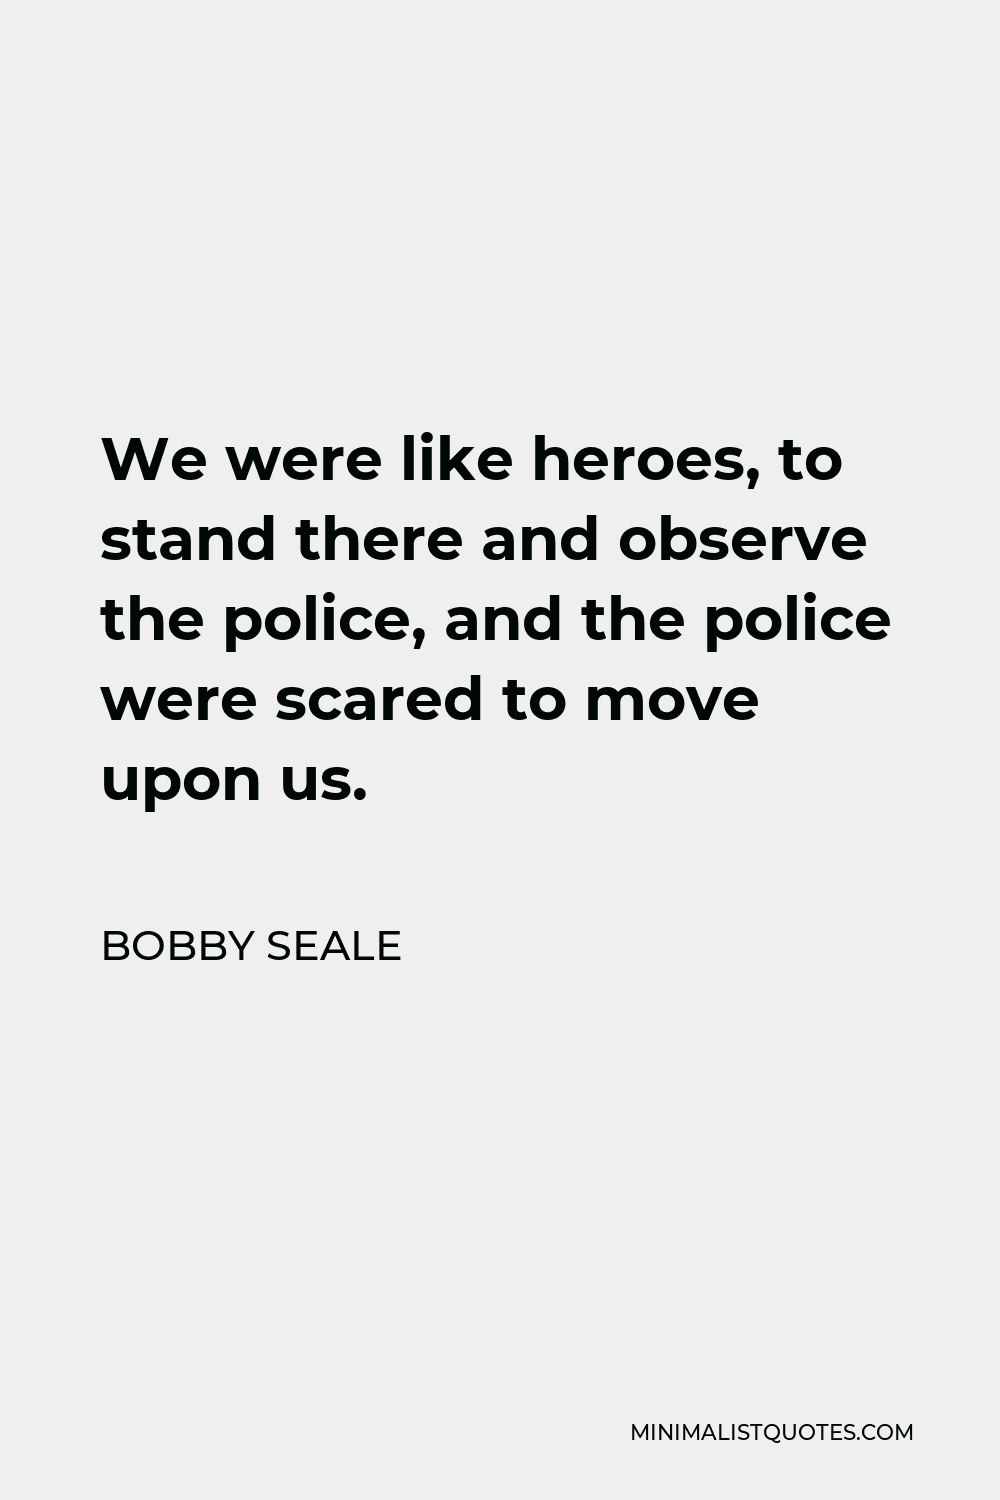 Bobby Seale Quote - We were like heroes, to stand there and observe the police, and the police were scared to move upon us.